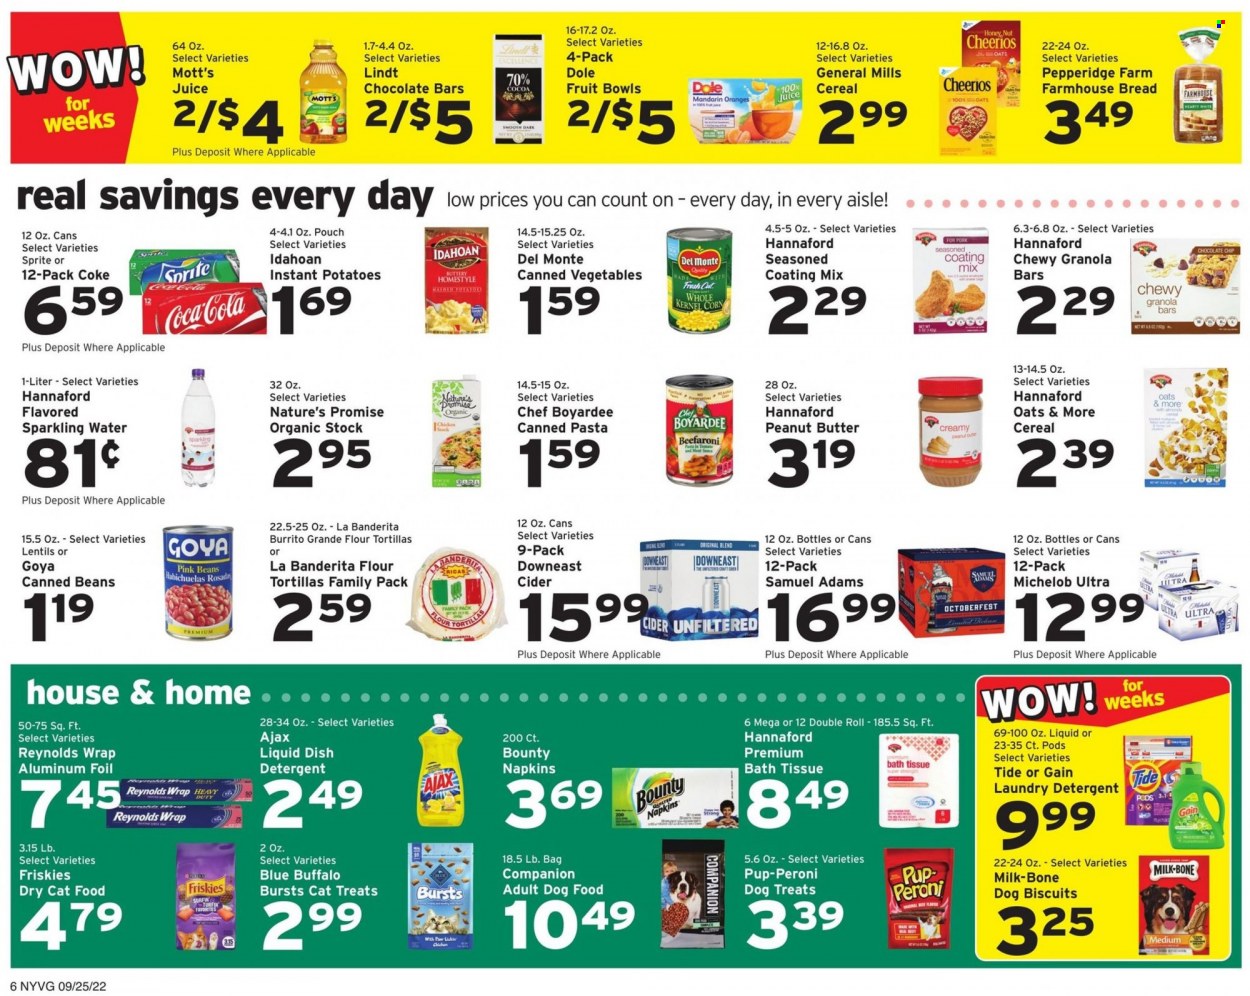 thumbnail - Hannaford Flyer - 09/25/2022 - 10/01/2022 - Sales products - bread, tortillas, Nature’s Promise, flour tortillas, beans, corn, Dole, mandarines, oranges, Mott's, pasta, sauce, burrito, milk, chocolate chips, Lindt, Bounty, chocolate bar, lentils, canned vegetables, Goya, Chef Boyardee, Del Monte, cereals, Cheerios, granola bar, peanut butter, Coca-Cola, Sprite, juice, sparkling water, cider, beer, napkins, bath tissue, detergent, Gain, Ajax, Tide, laundry detergent, dishwasher cleaner, aluminium foil, animal food, animal treats, Blue Buffalo, cat food, dog food, dog biscuits, dry cat food, Pup-Peroni, Friskies, Michelob. Page 8.